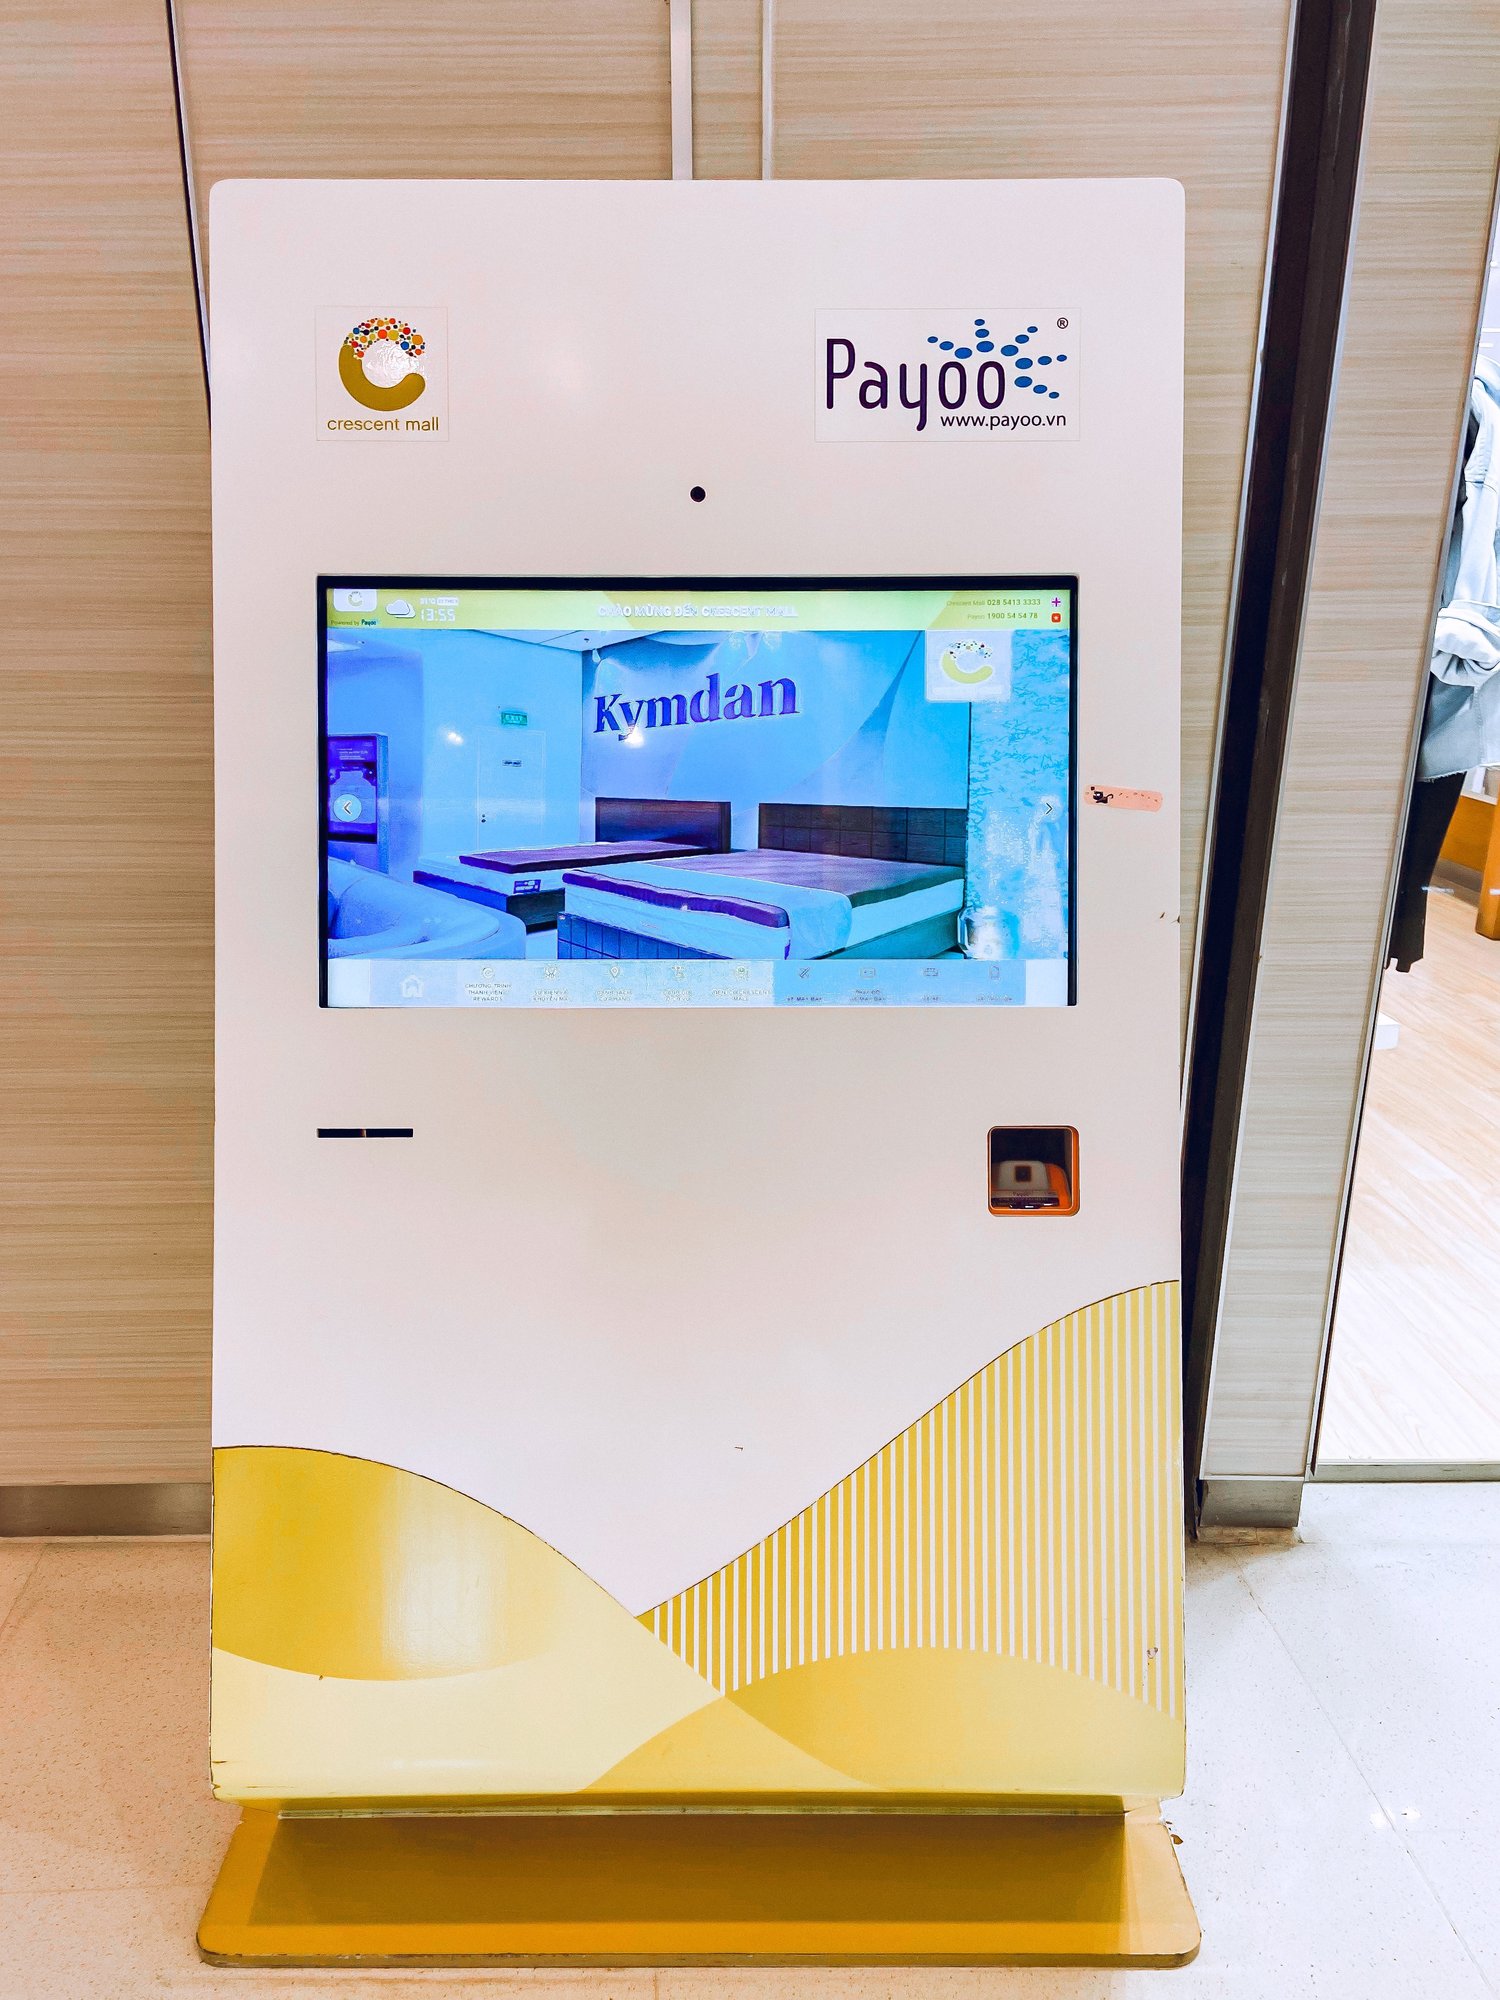 Payoo Kiosk in Crescent Mall